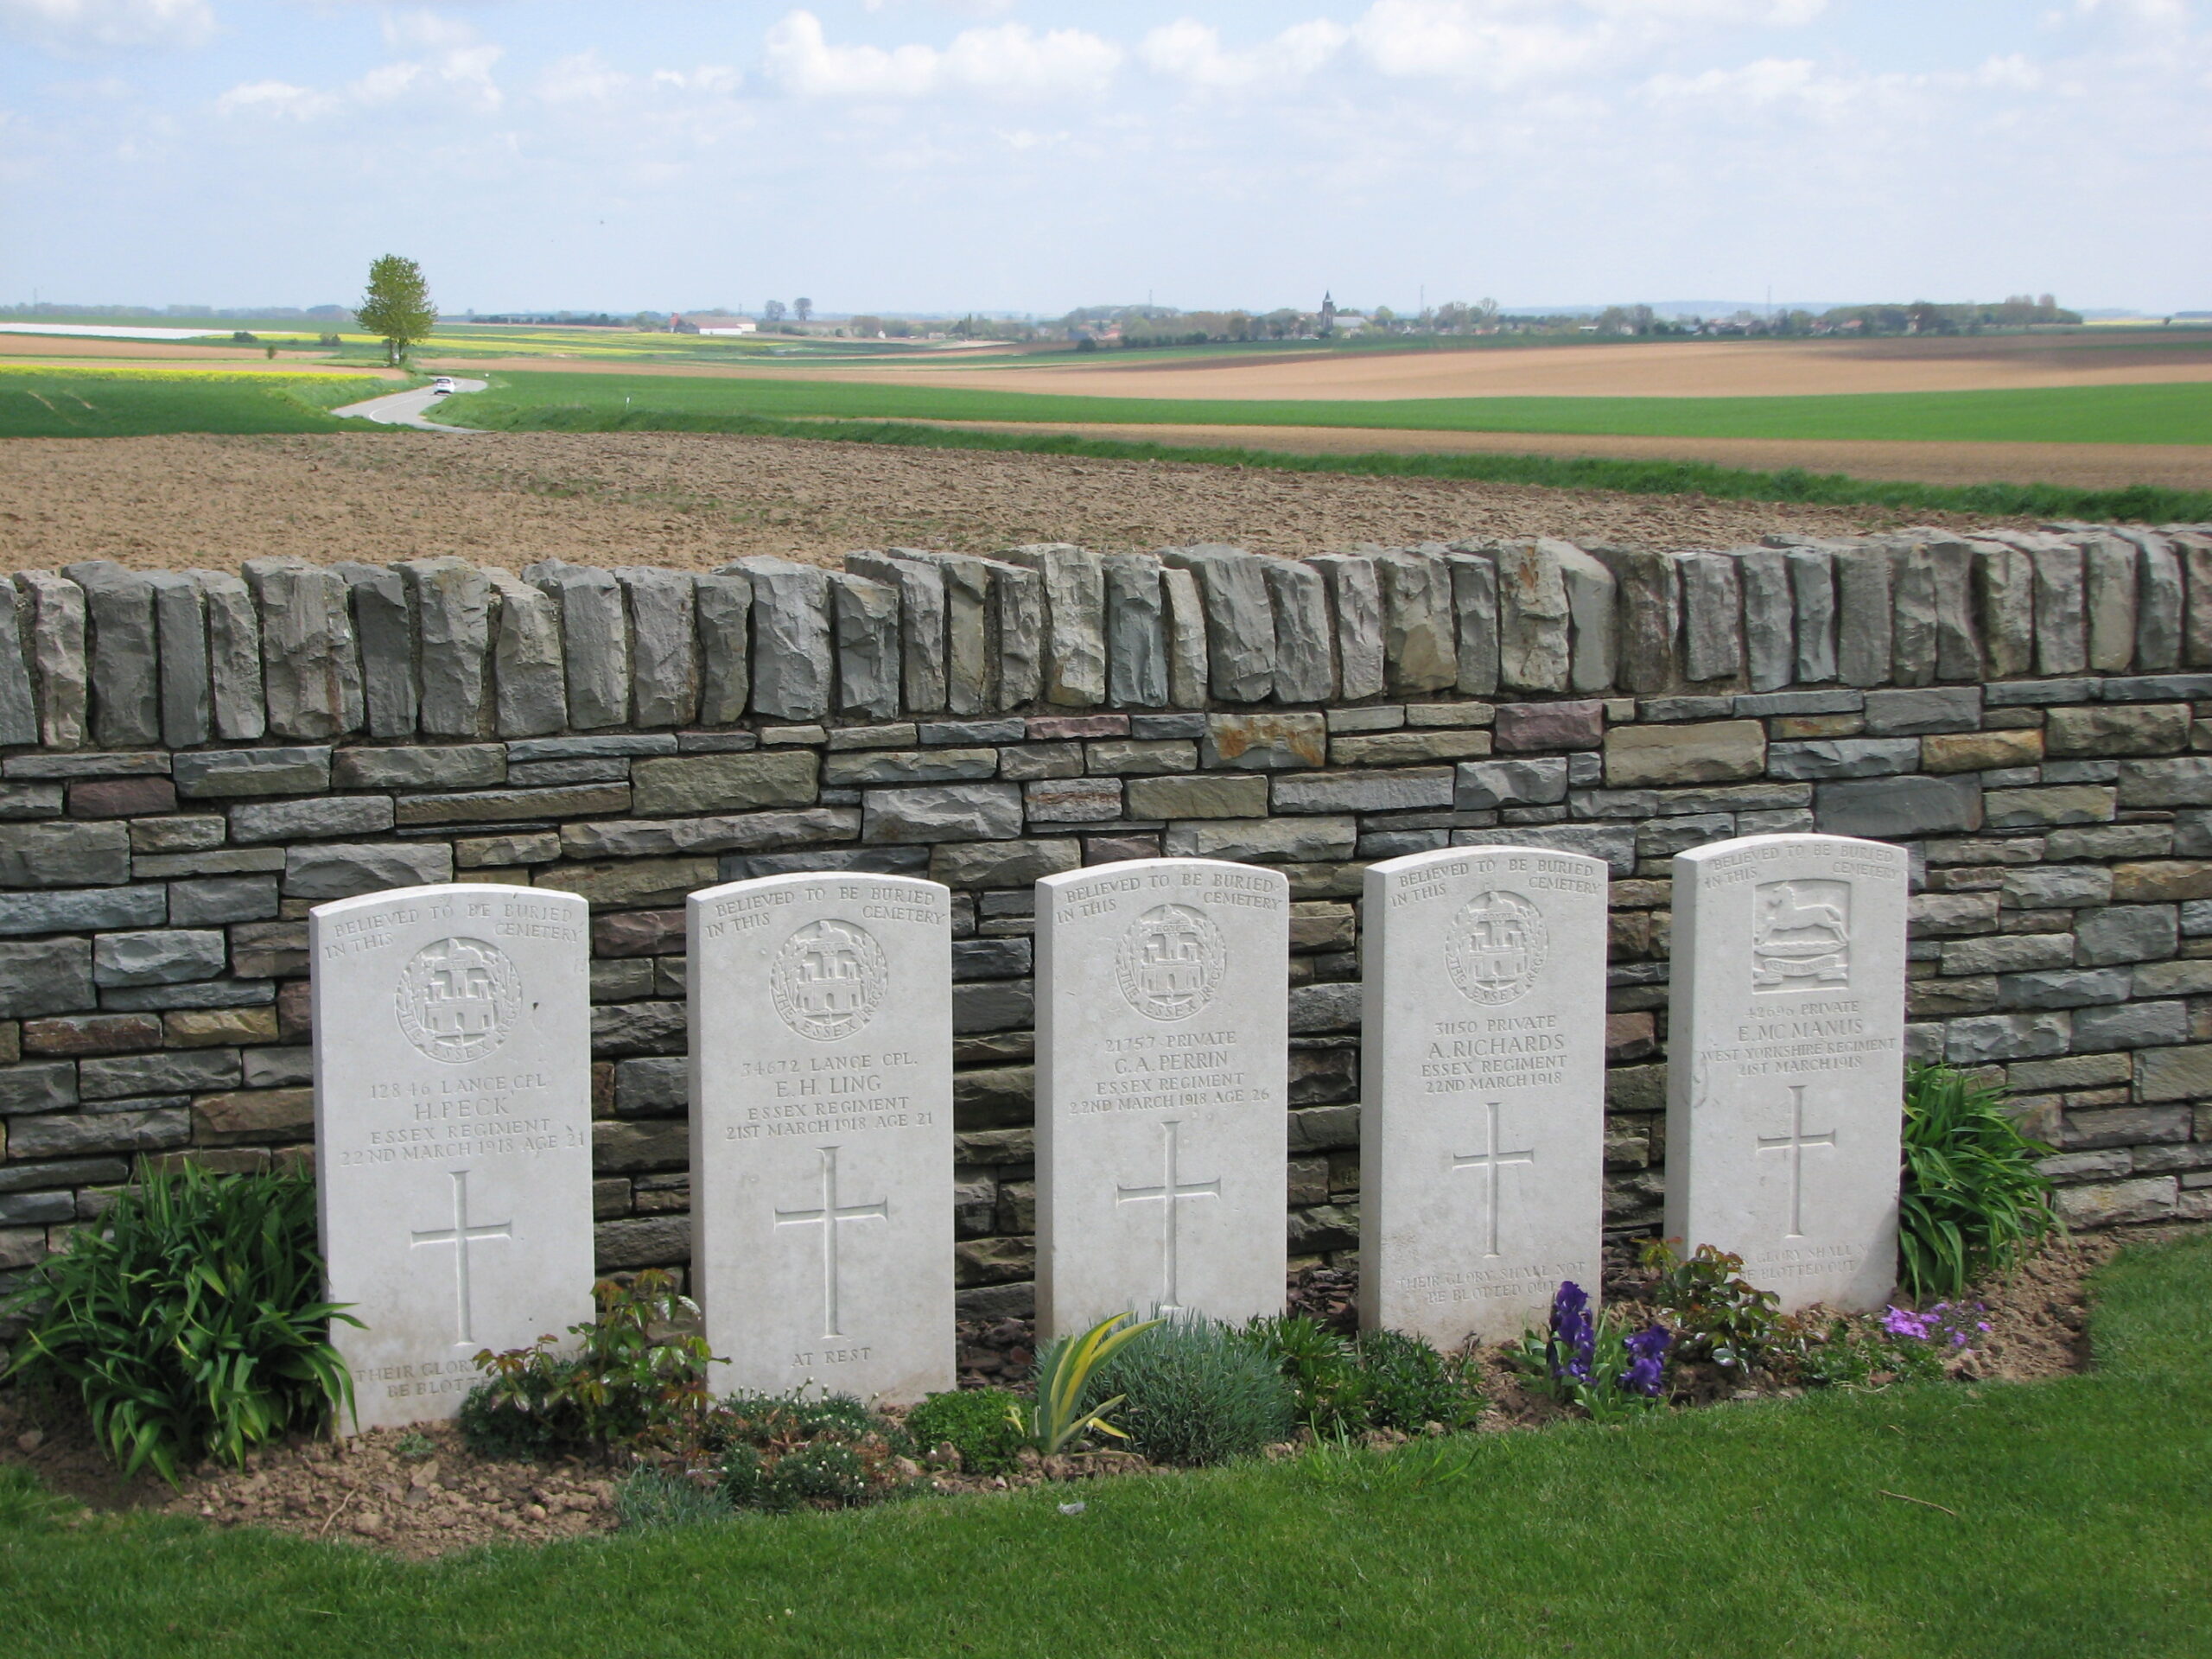 5 of the 29 Special Memorials in Vaulx Hill Cemetery<br>Herbert's Special Memorial is that nearest the camera<br />MA